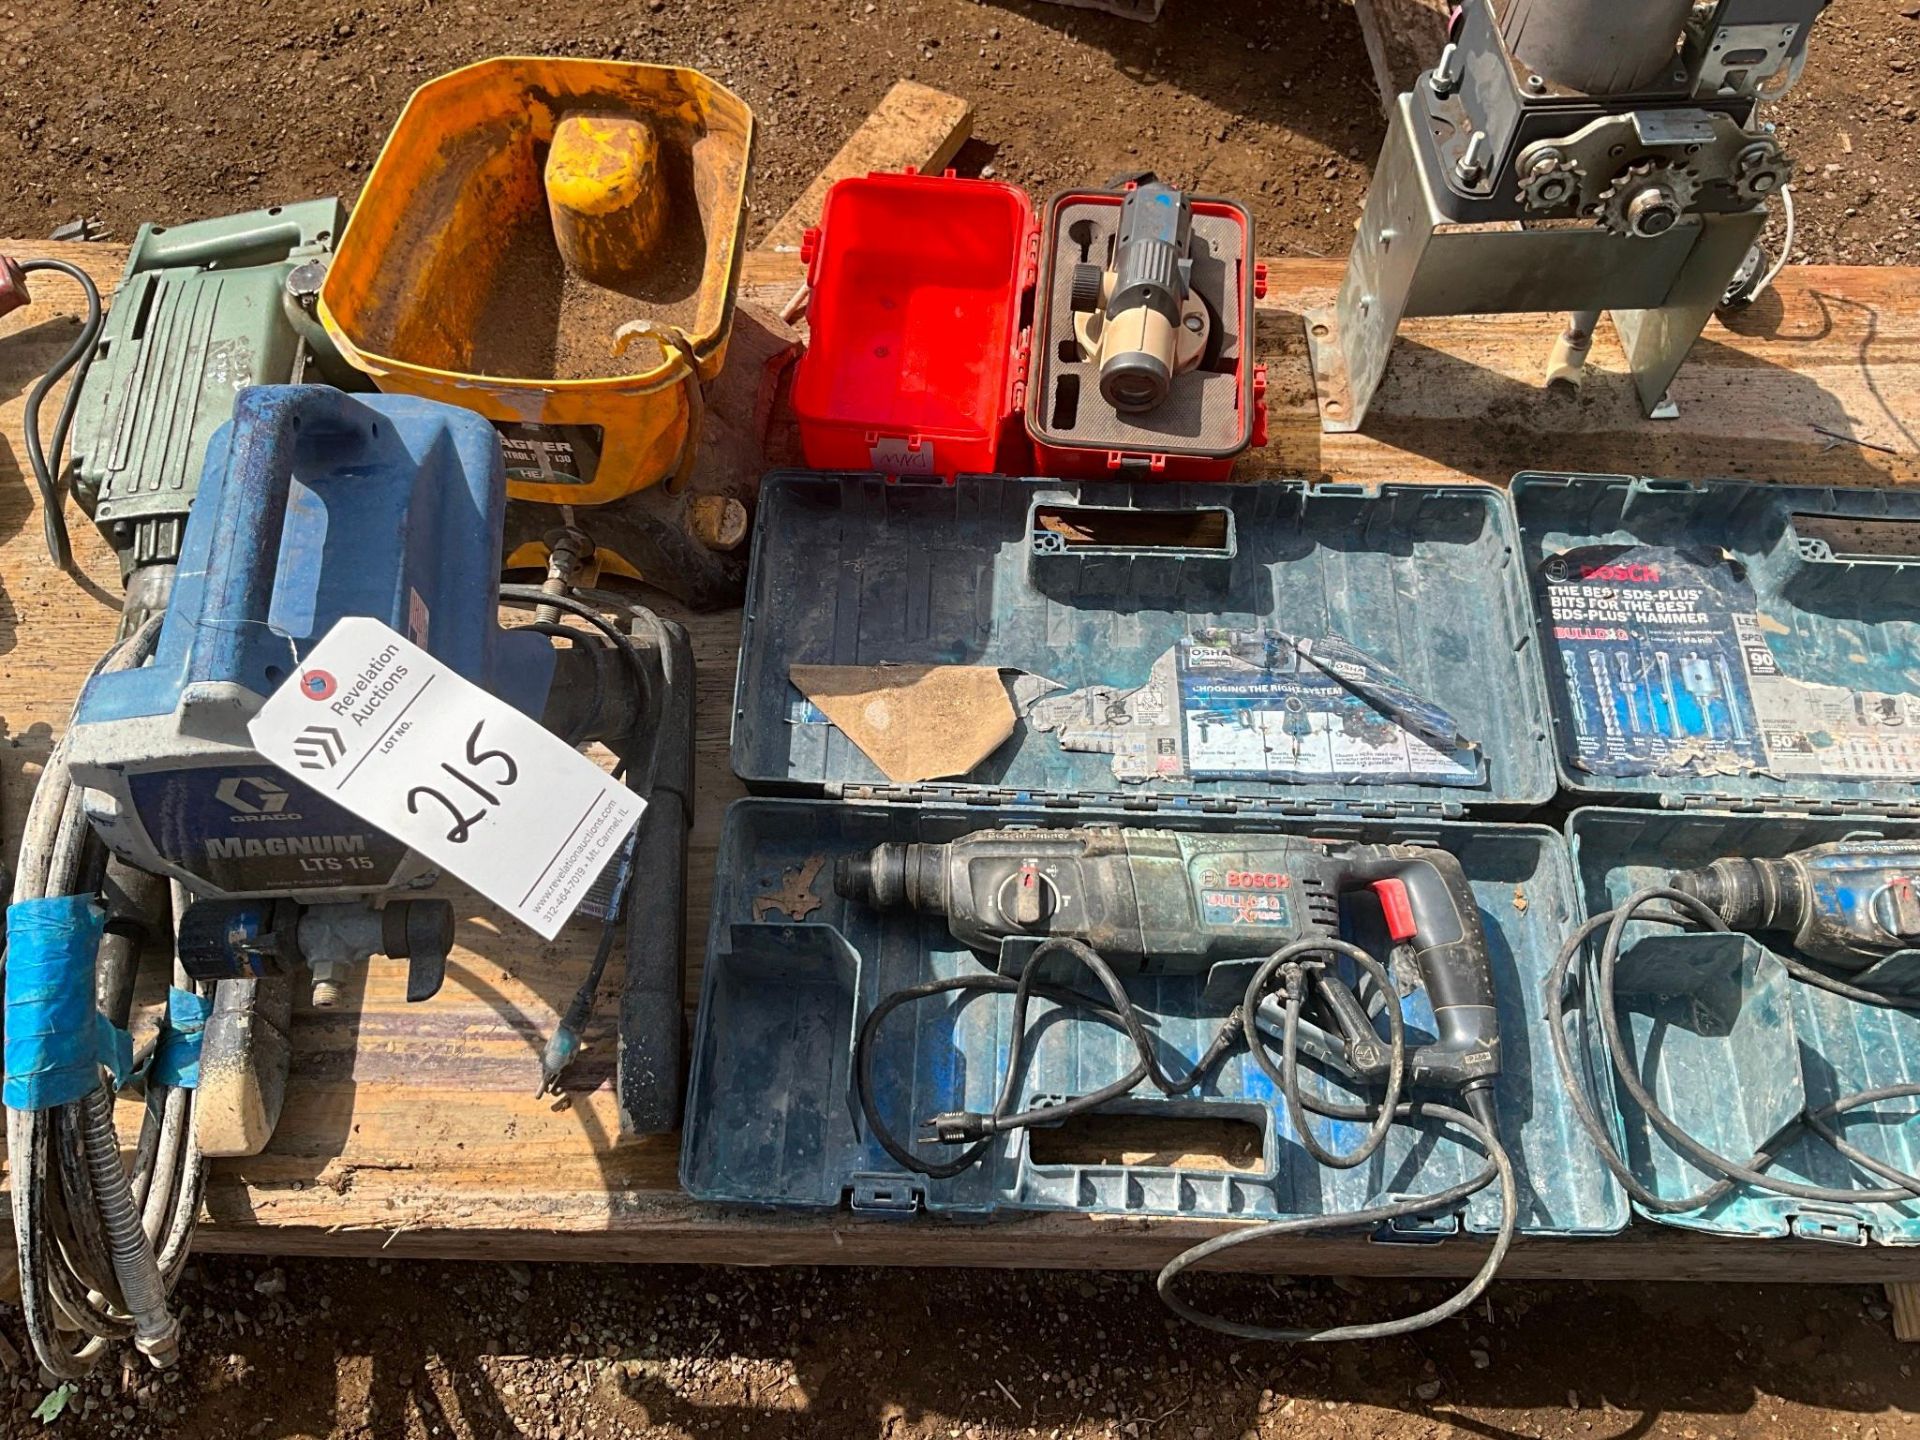 LOT OF SAWS, DRILLS, COMPACTORS, HEATERS, ETC. - Image 3 of 13